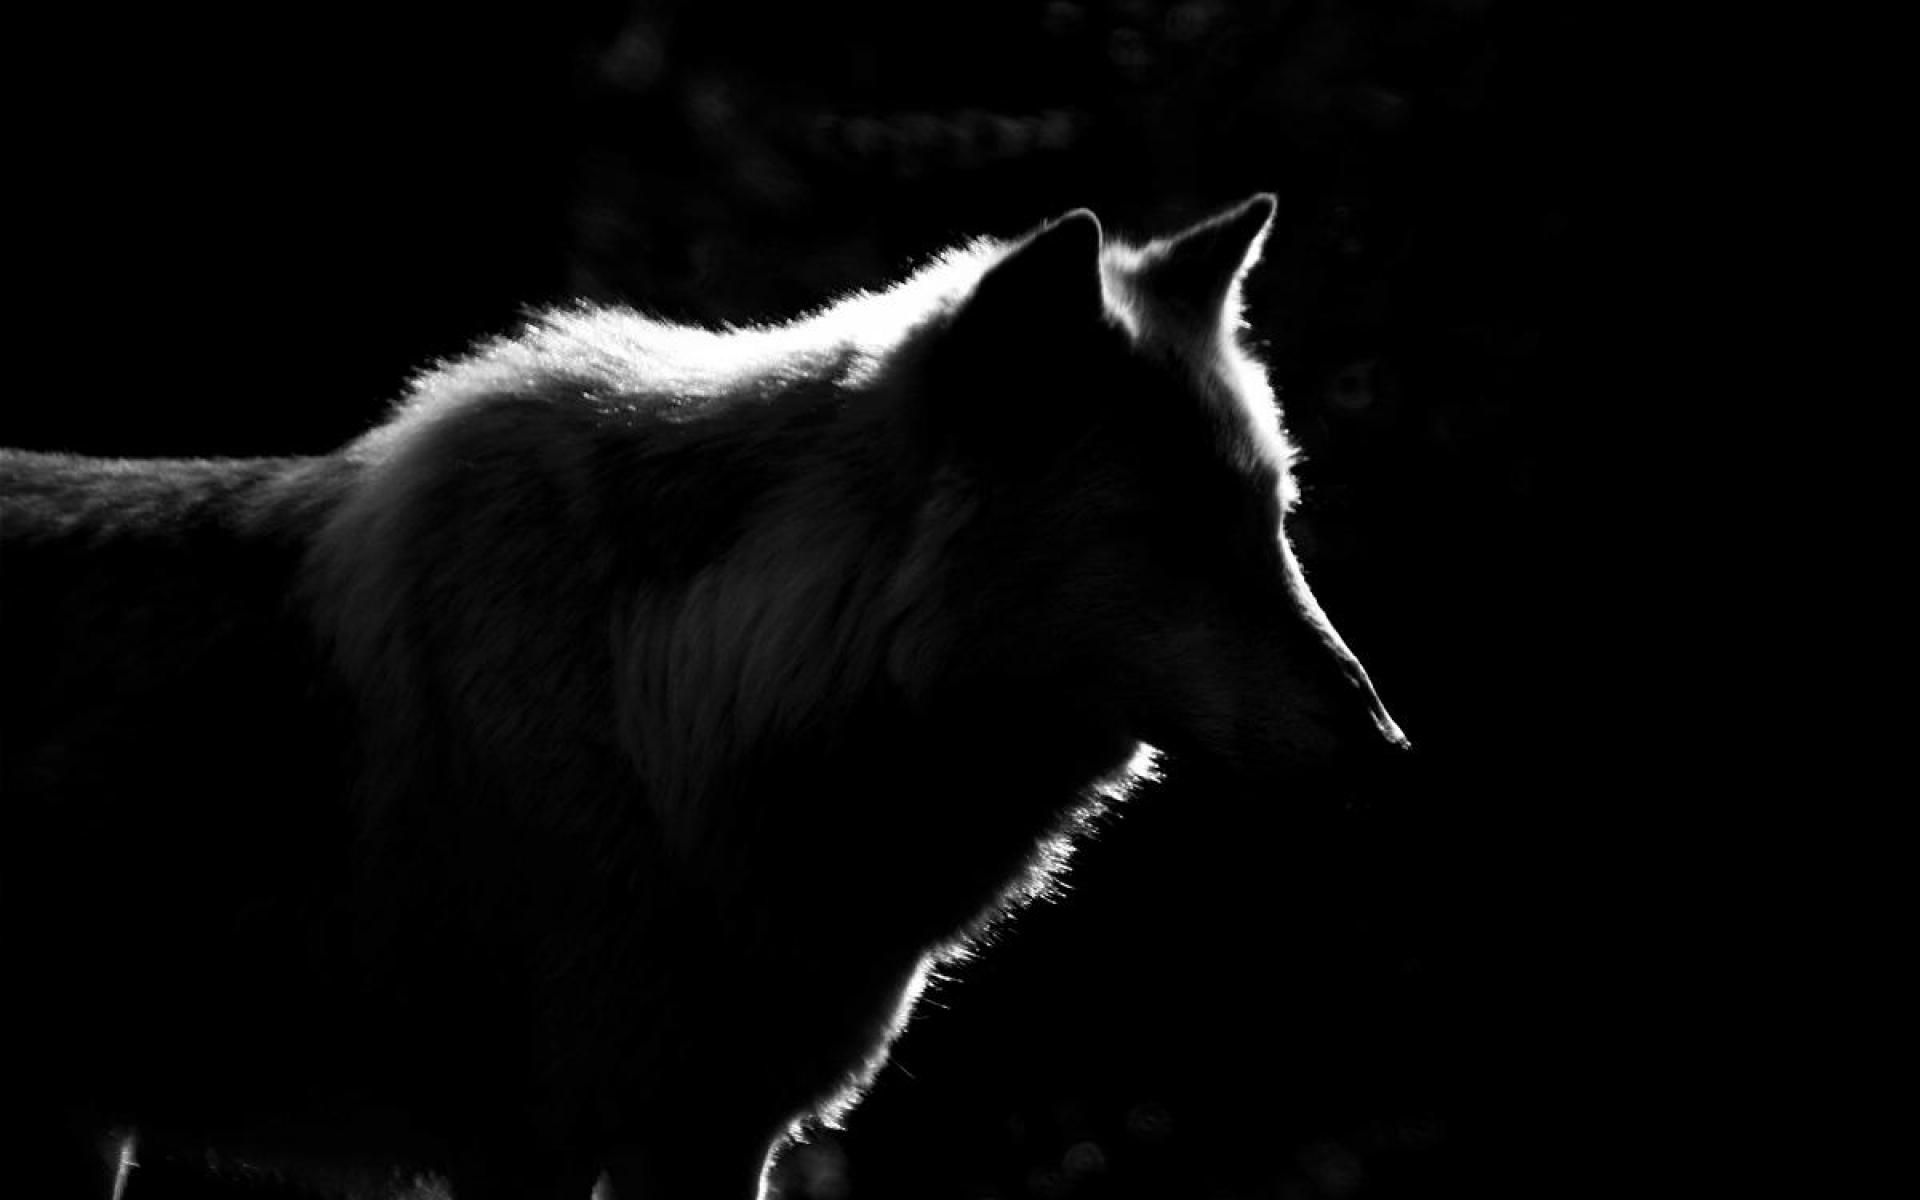 100+] Lone Wolf Wallpapers | Wallpapers.com